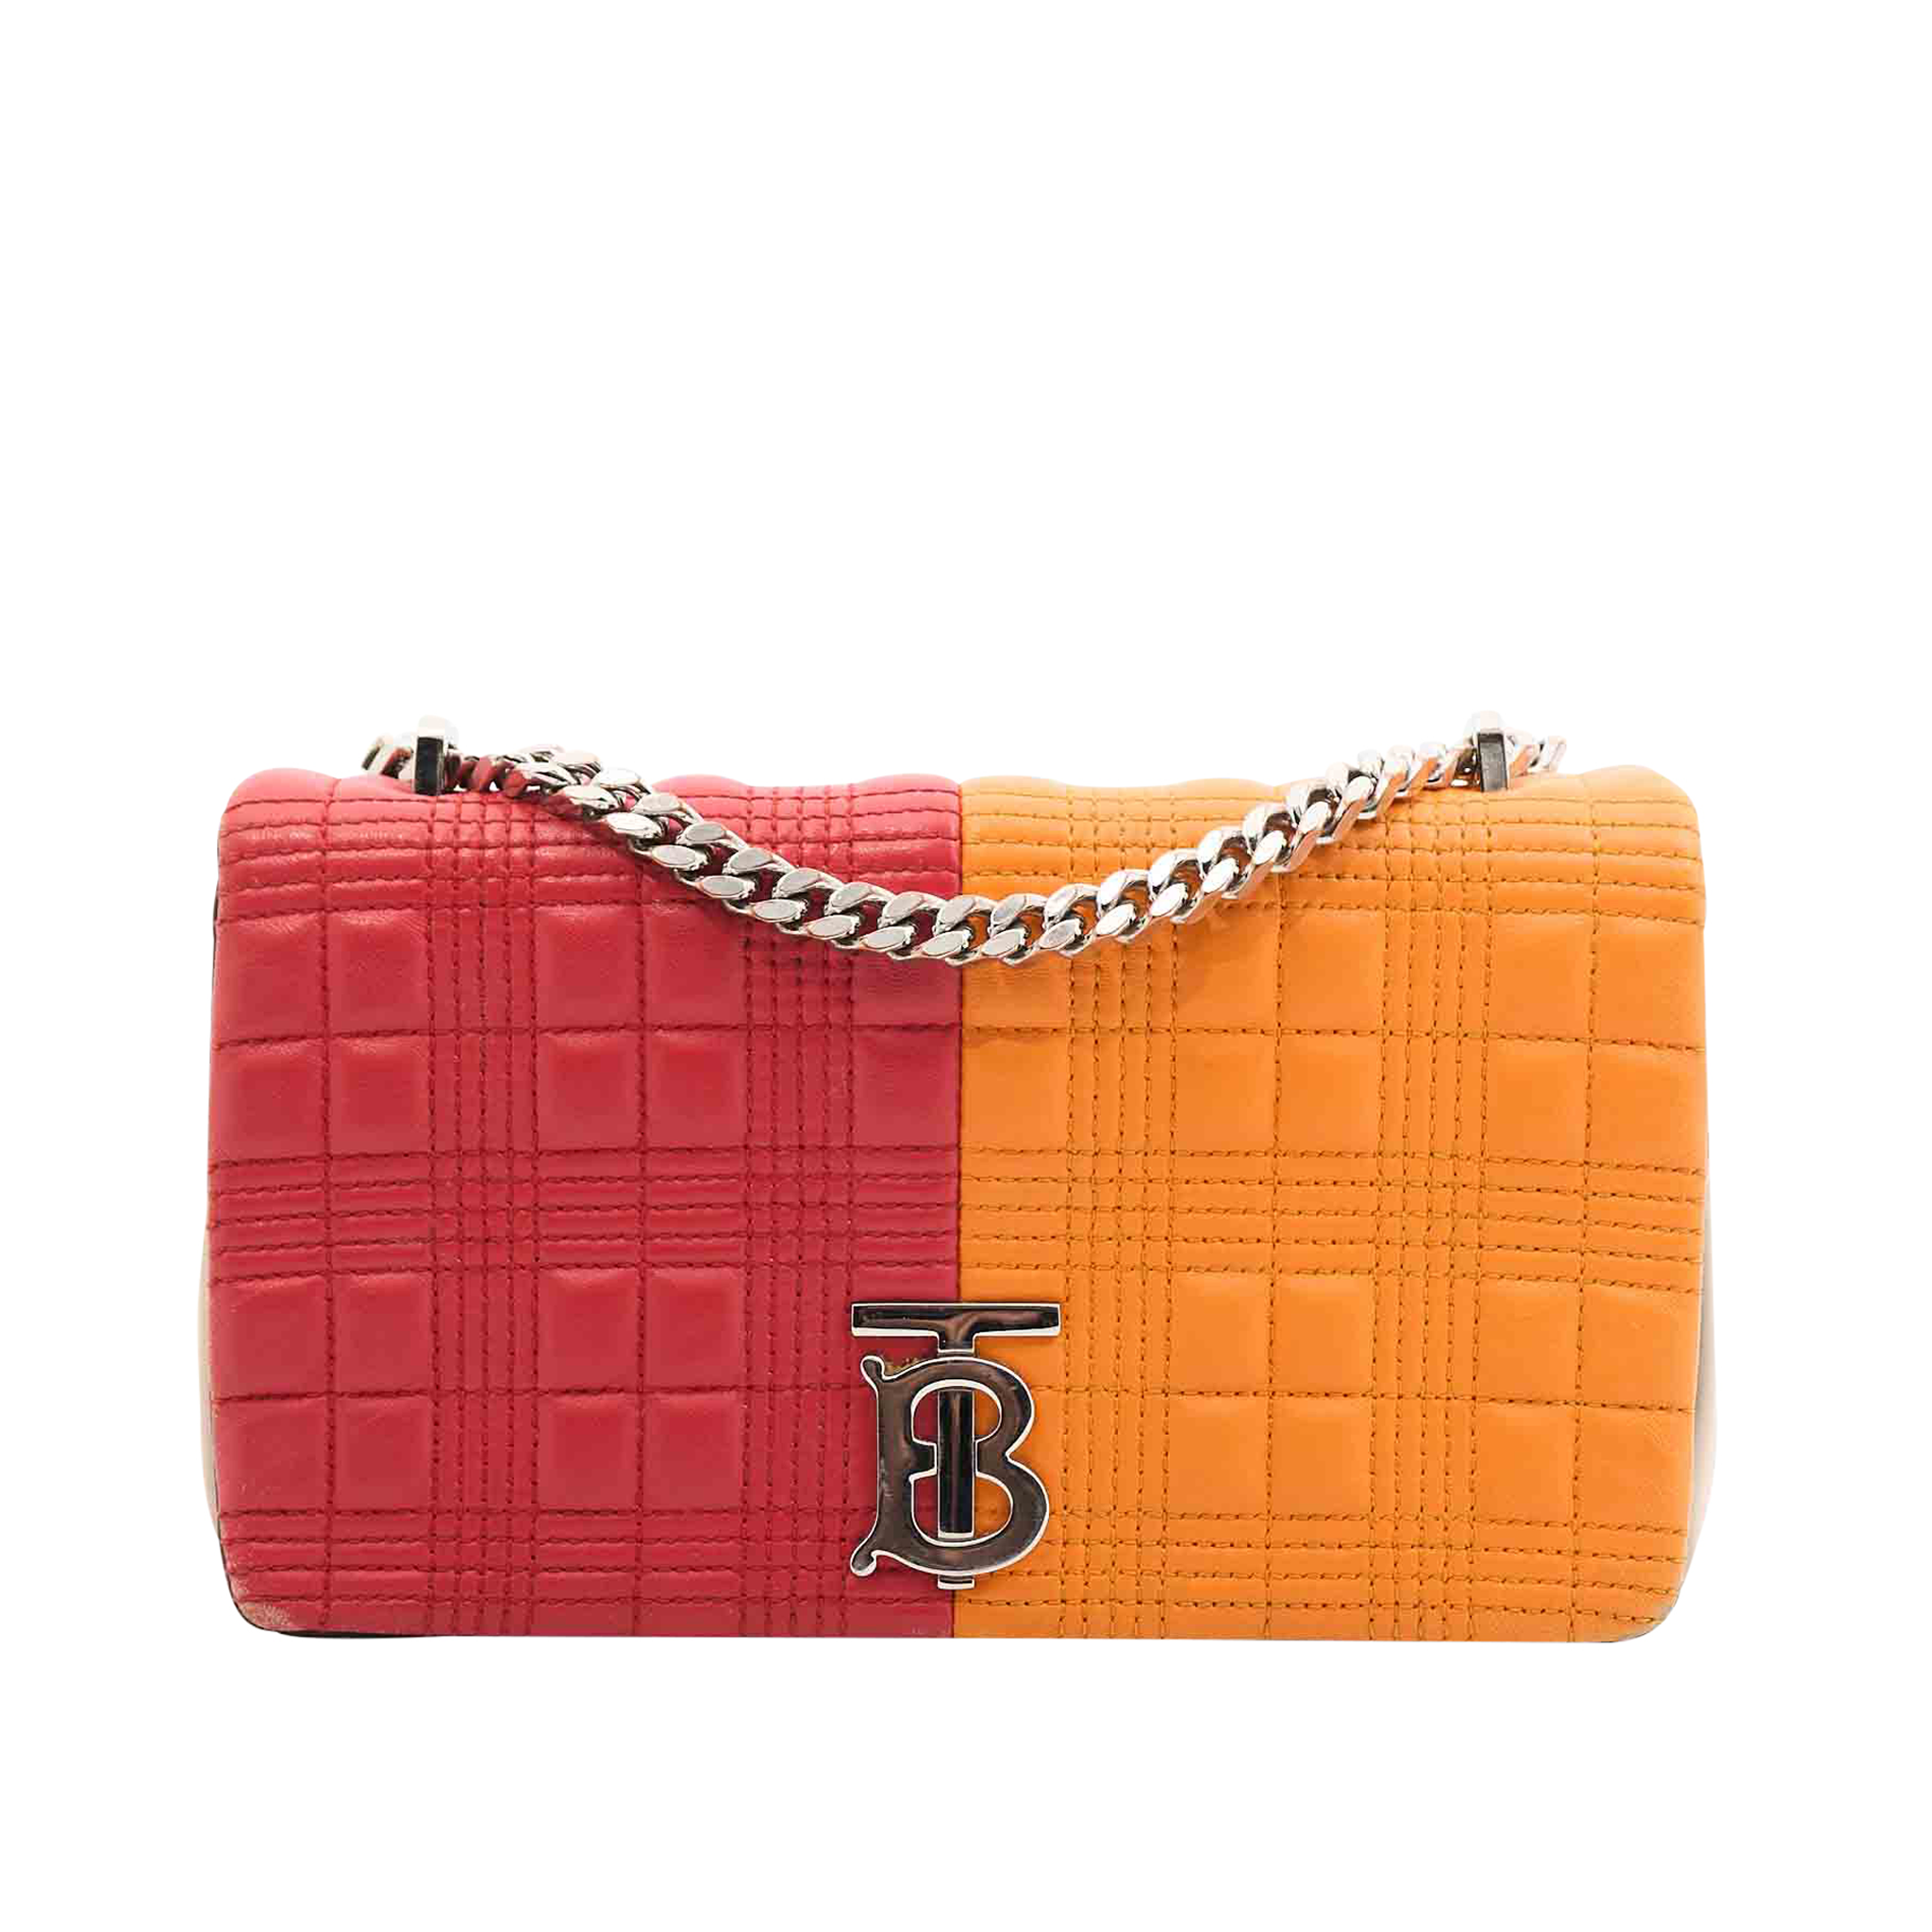 Burberry Leather Quilted Crossbody in Orange and Red